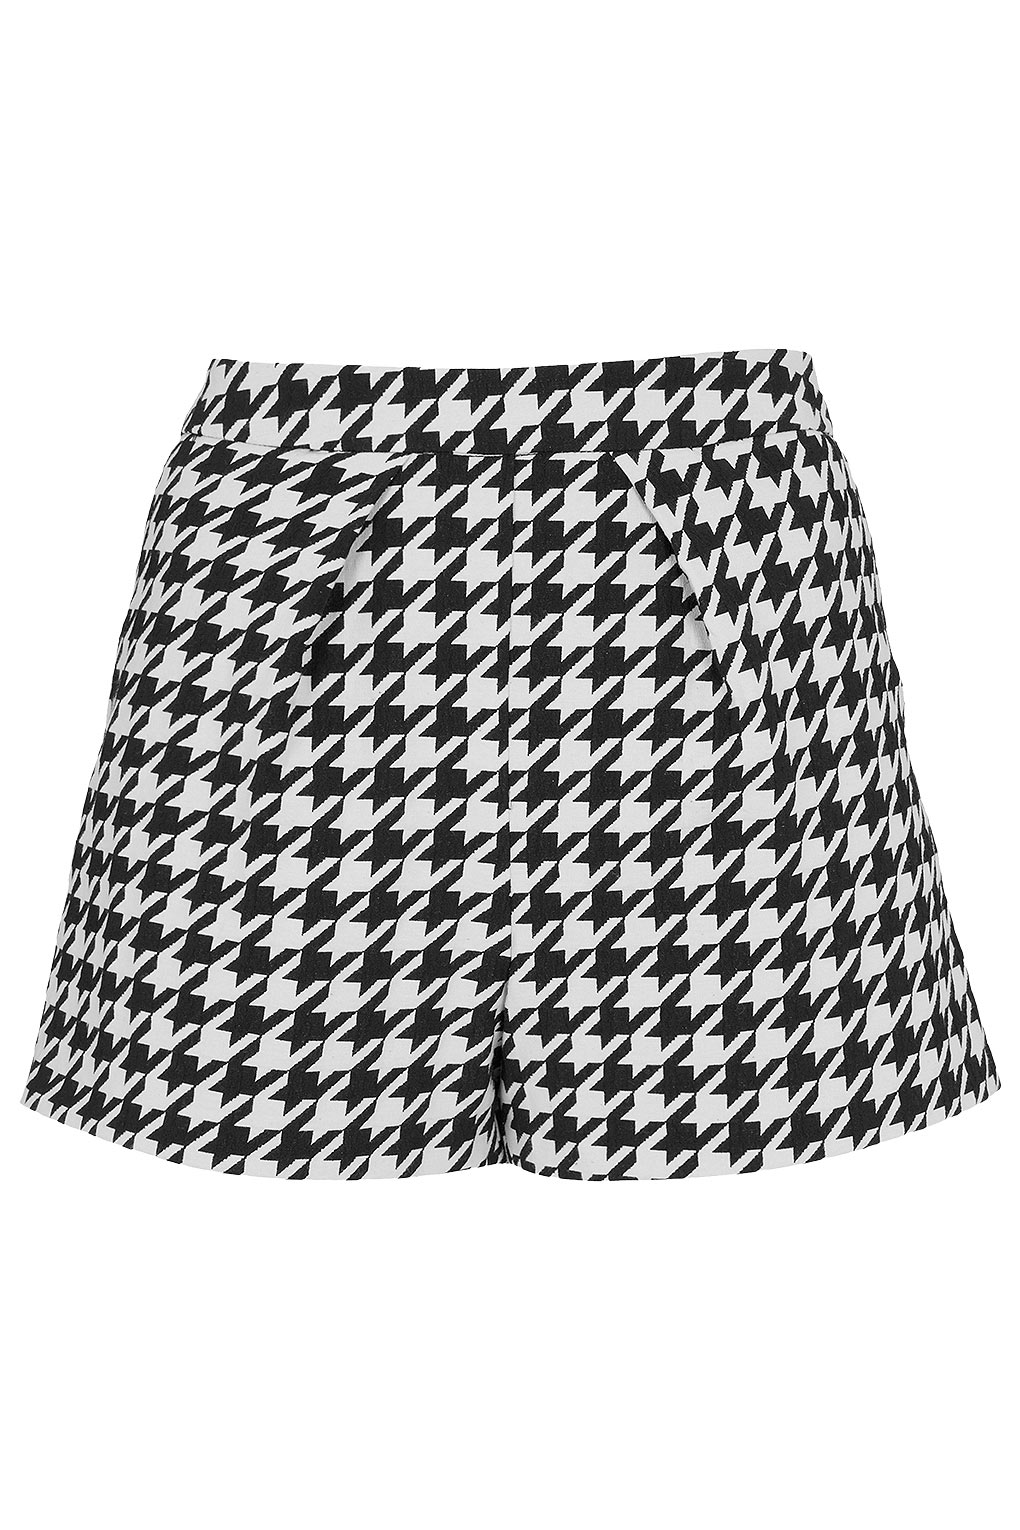 Lyst - Topshop Houndstooth Pleat Shorts in Black